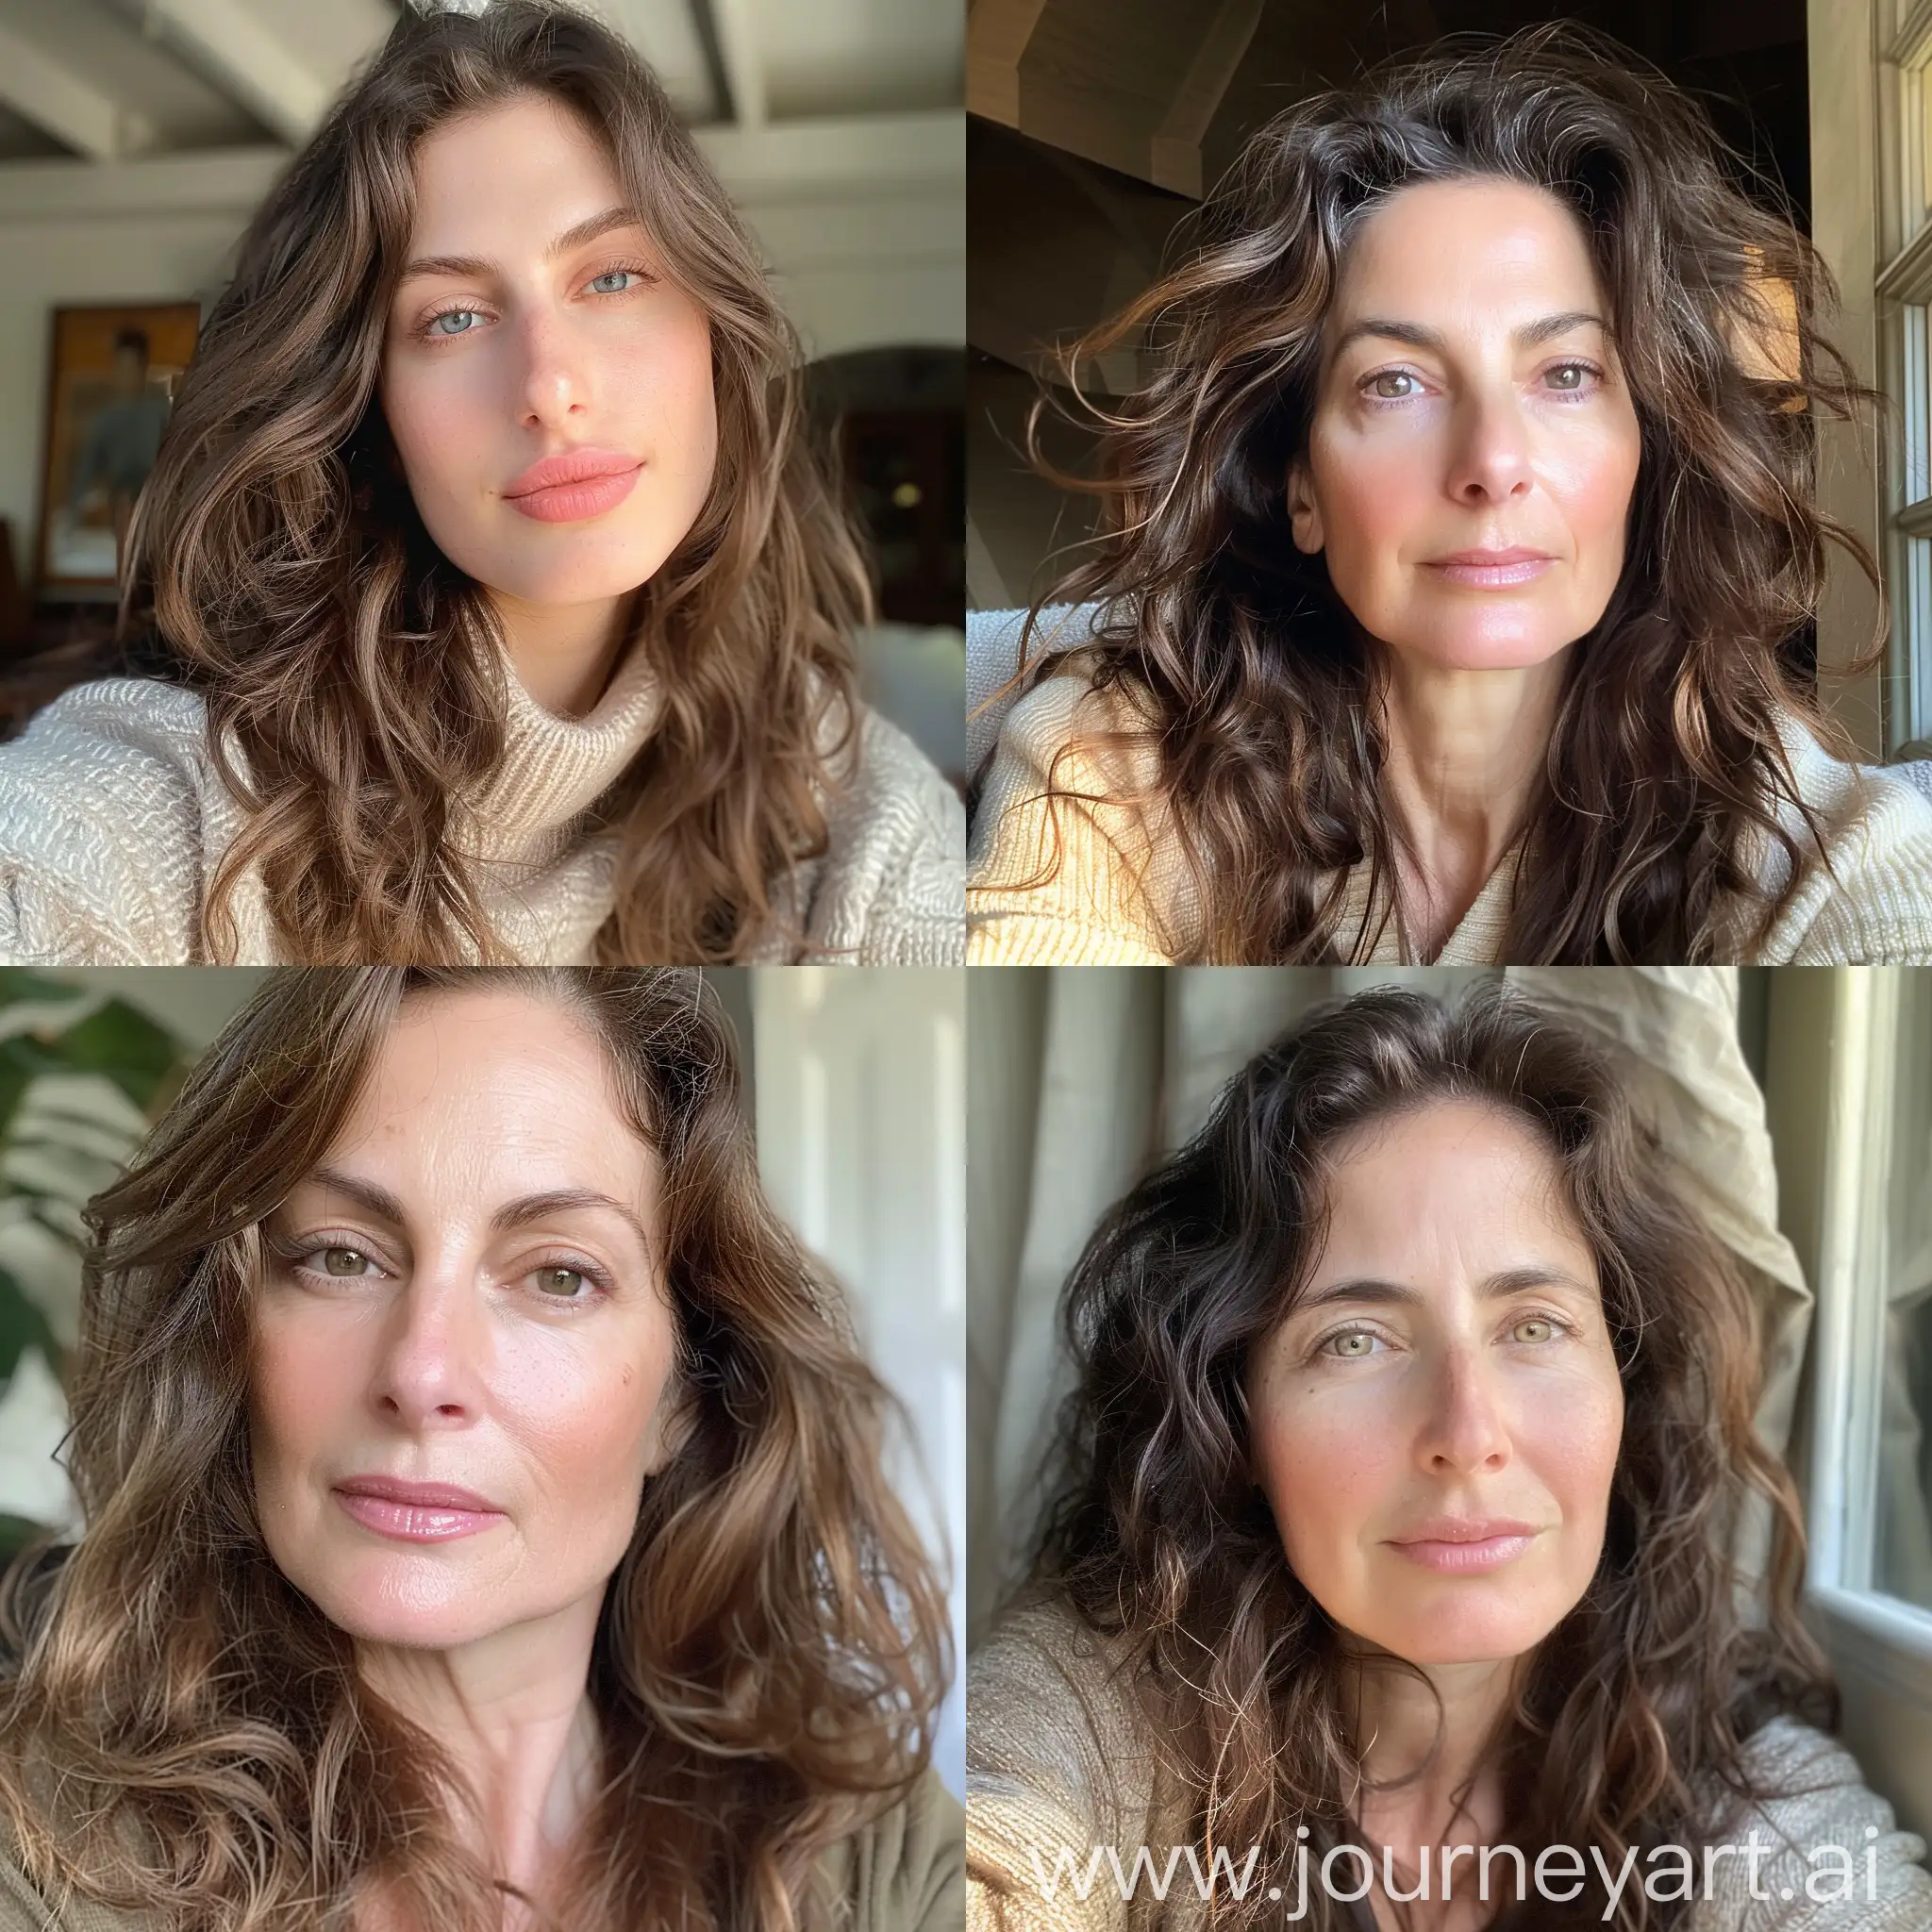 Aesthetic instagram selfie of a Jewish mother with full wavy brown hair, broad nose, big bridge nose, crooked nose, woman, mid 40's, soft brown clothing color tones--ar 9:16